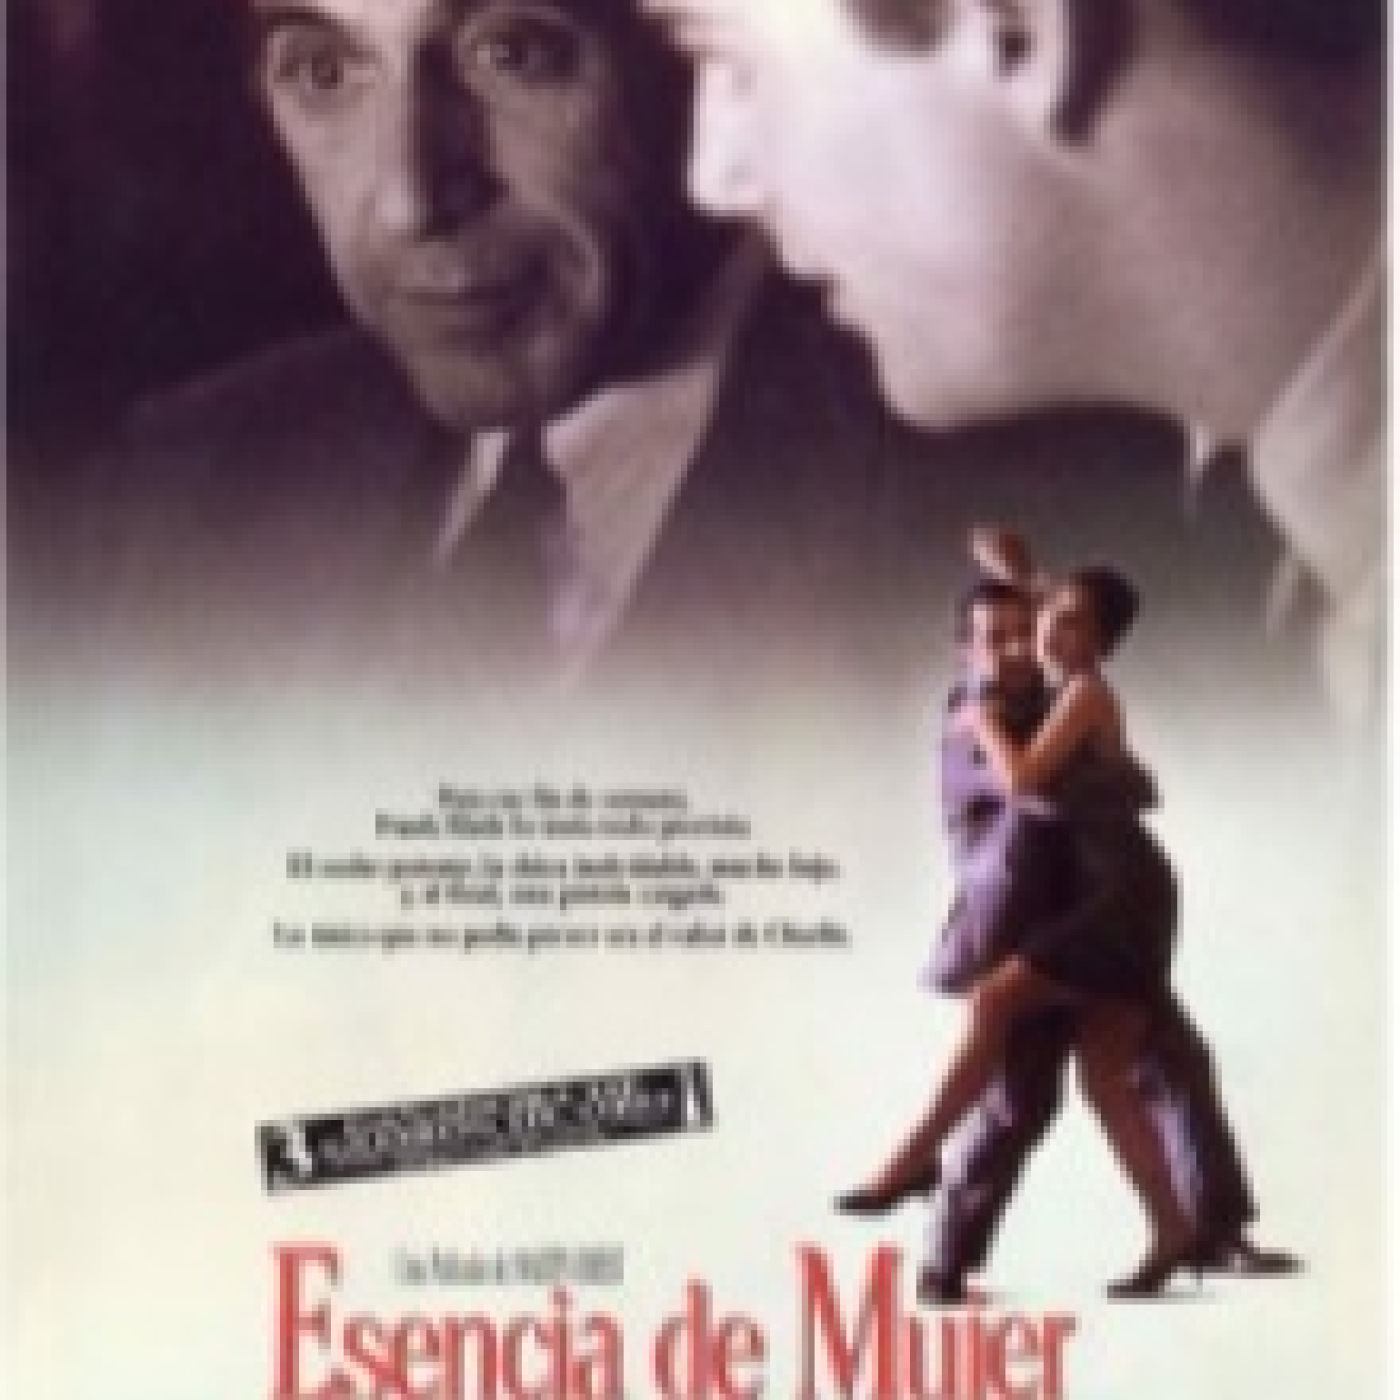 2x63.-Scent of a Woman - 1992